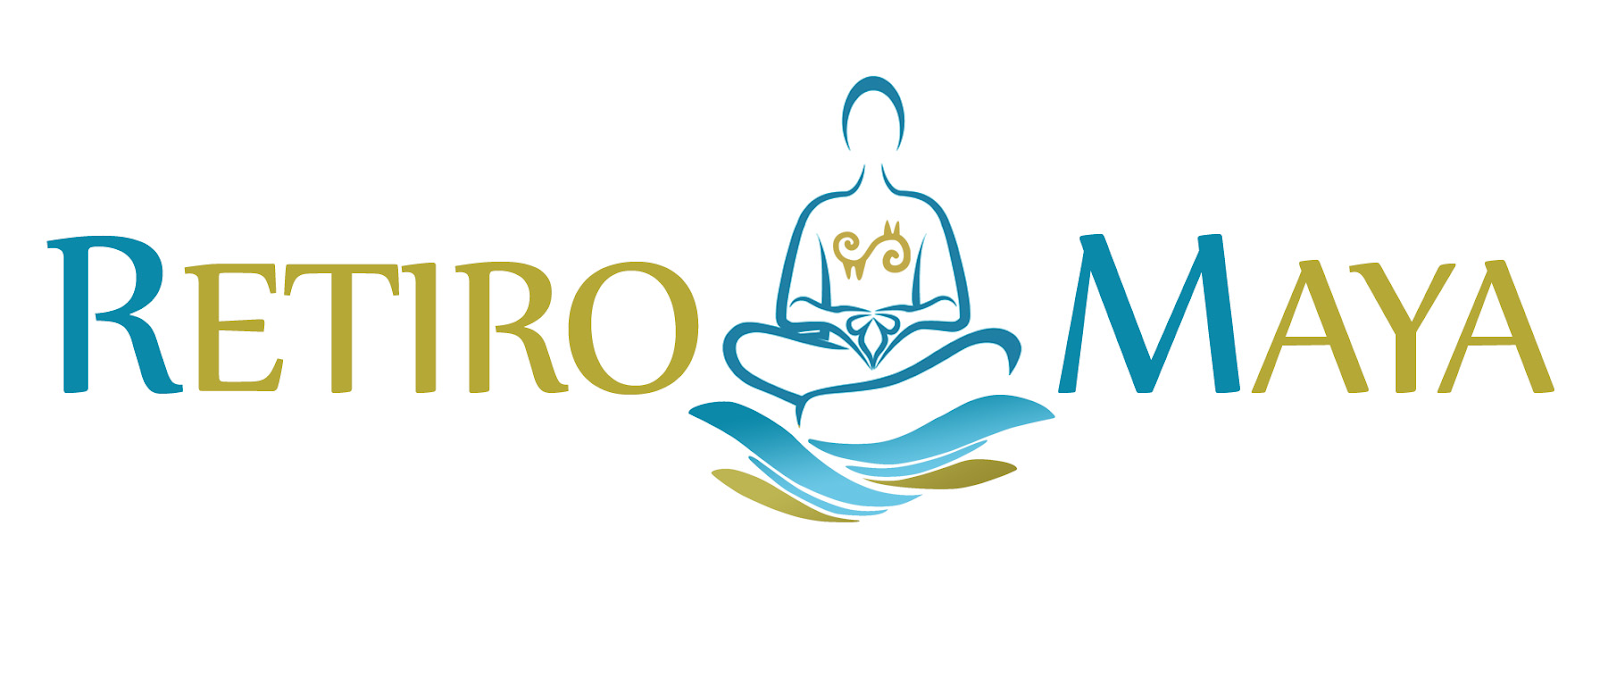 The logo for retiro maya is a silhouette of a person sitting in a lotus position.